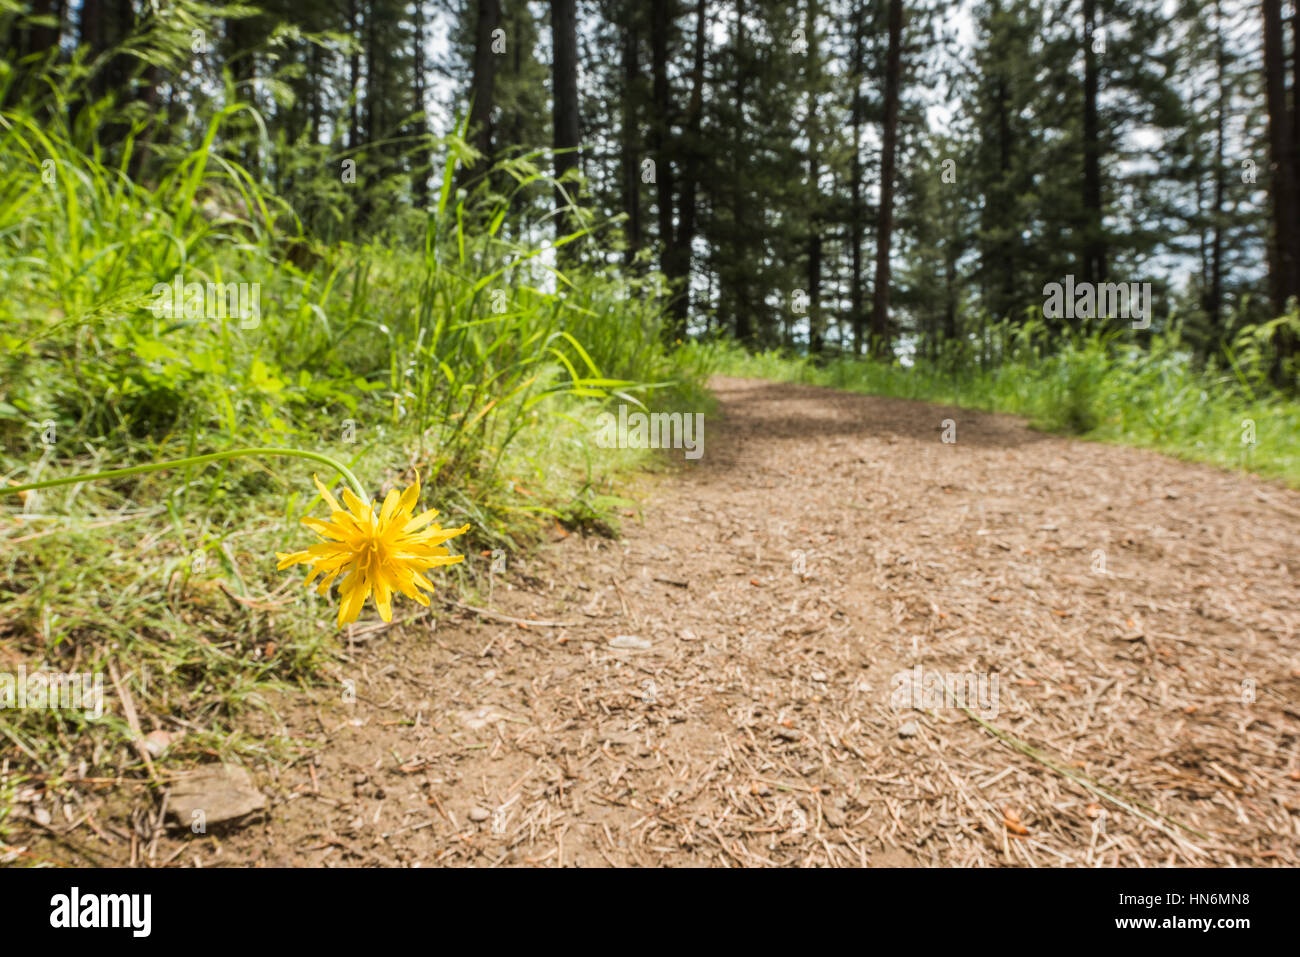 Cat's ear flower closeup on dirt hiking trail leading to alpine forest Stock Photo